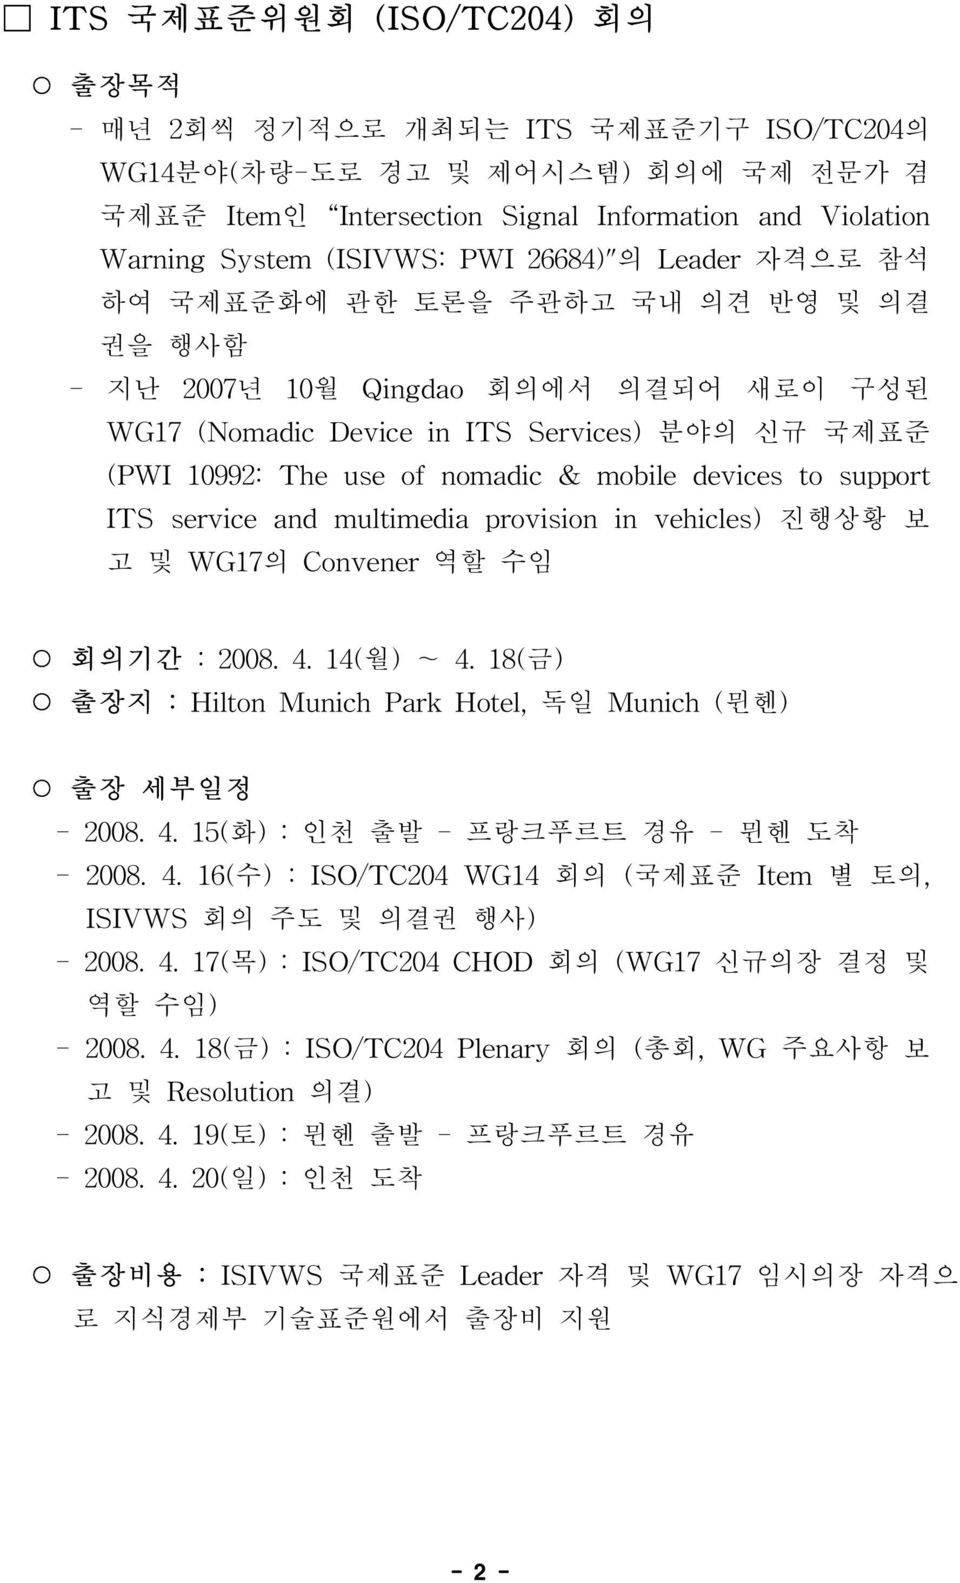 of nomadic & mobile devices to support ITS service and multimedia provision in vehicles) 진행상황 보 고 및 WG17의 Convener 역할 수임 회의기 간 : 2008. 4. 14(월) ~ 4.